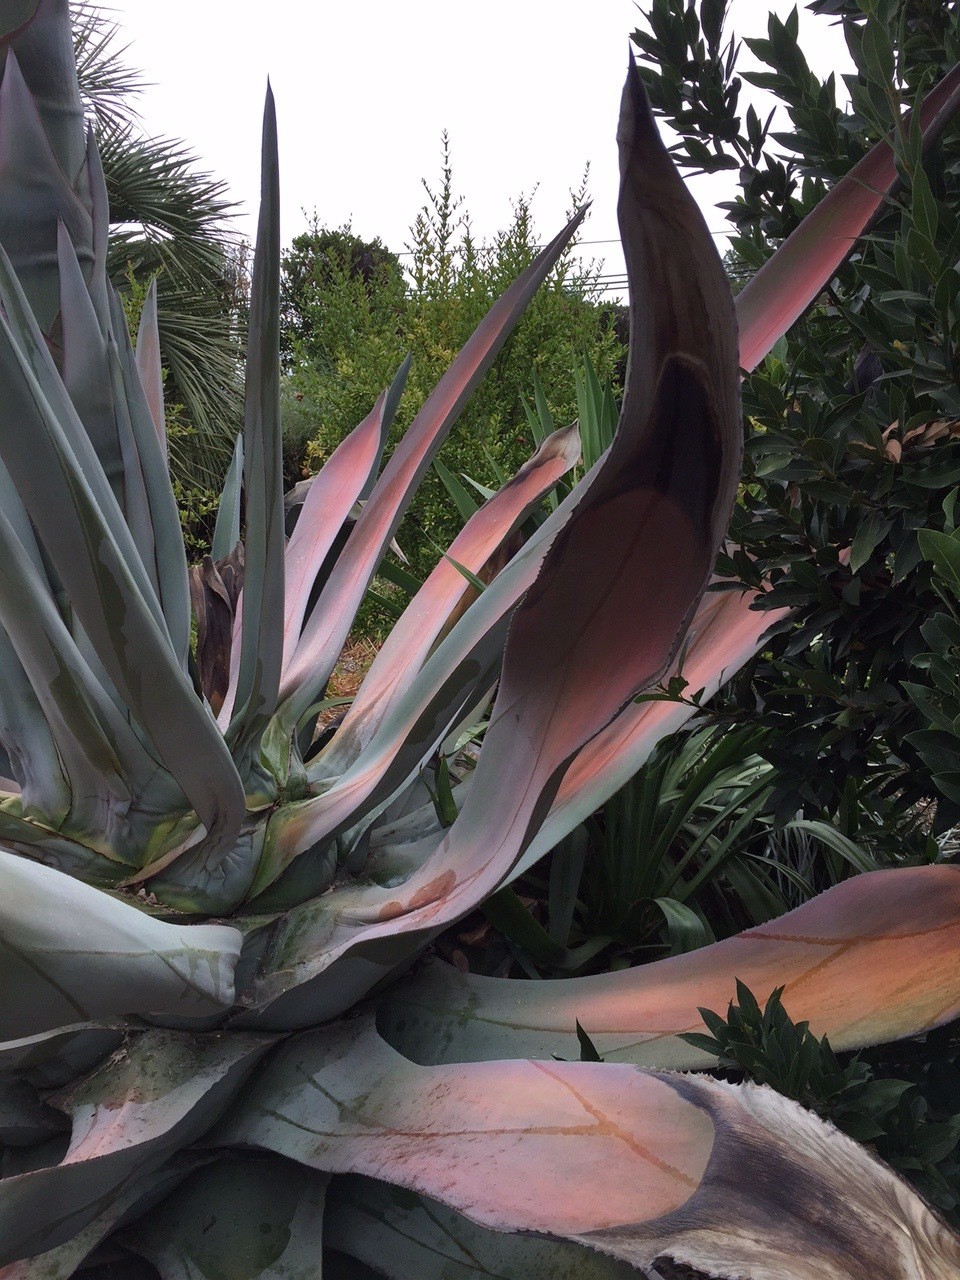 Agave Plant at the Gardener